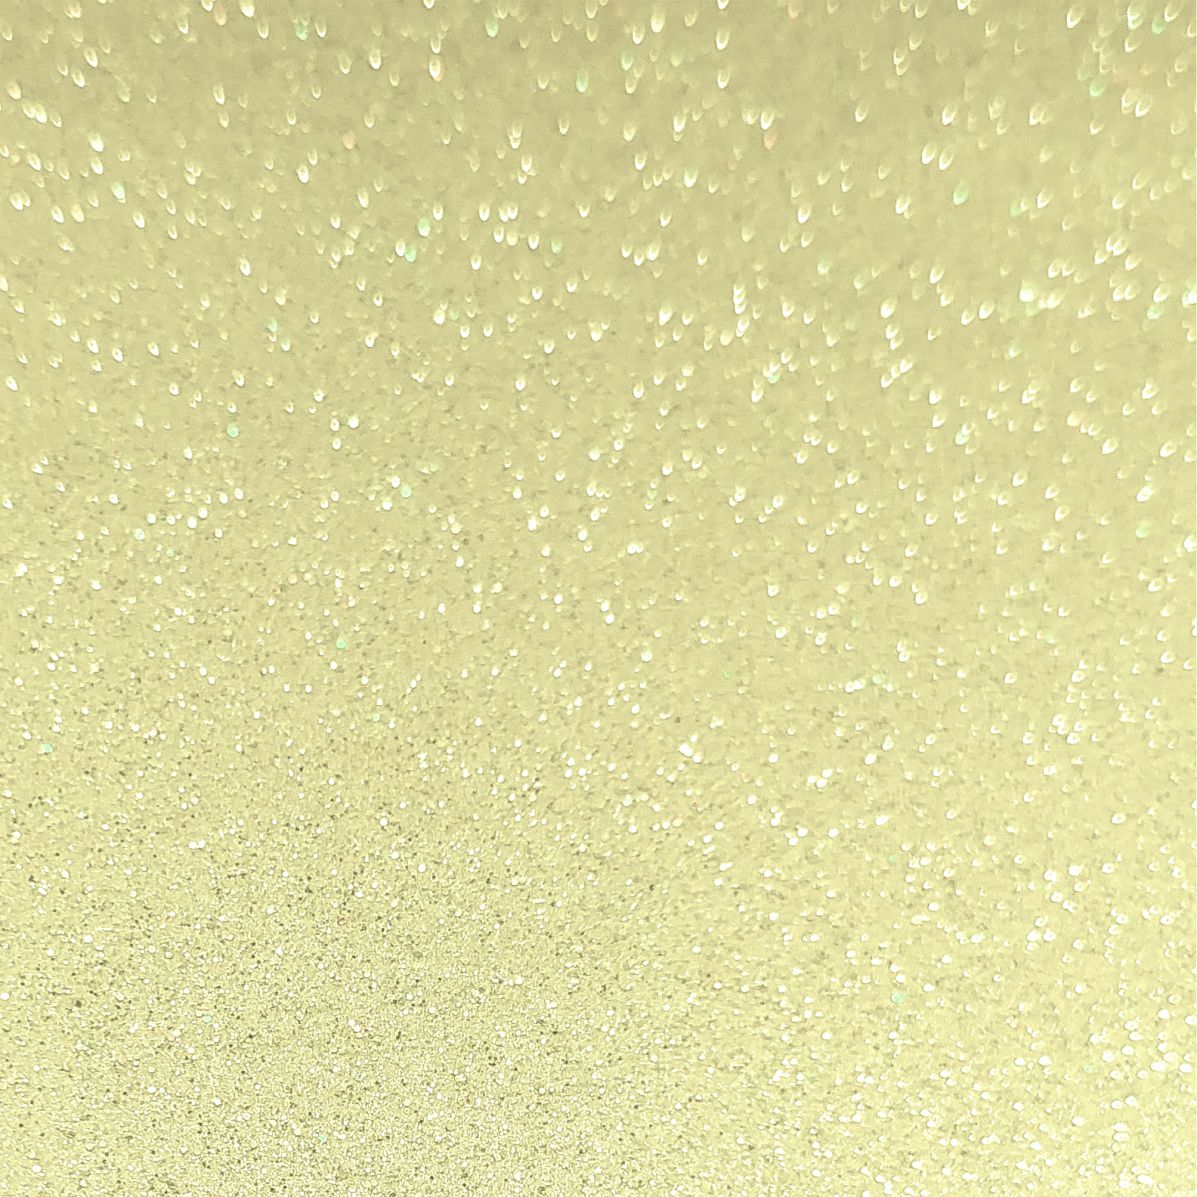 StyleTech Ultra FX Glitter - Platinum Adhesive Vinyl Choose Your Length CLEARANCE